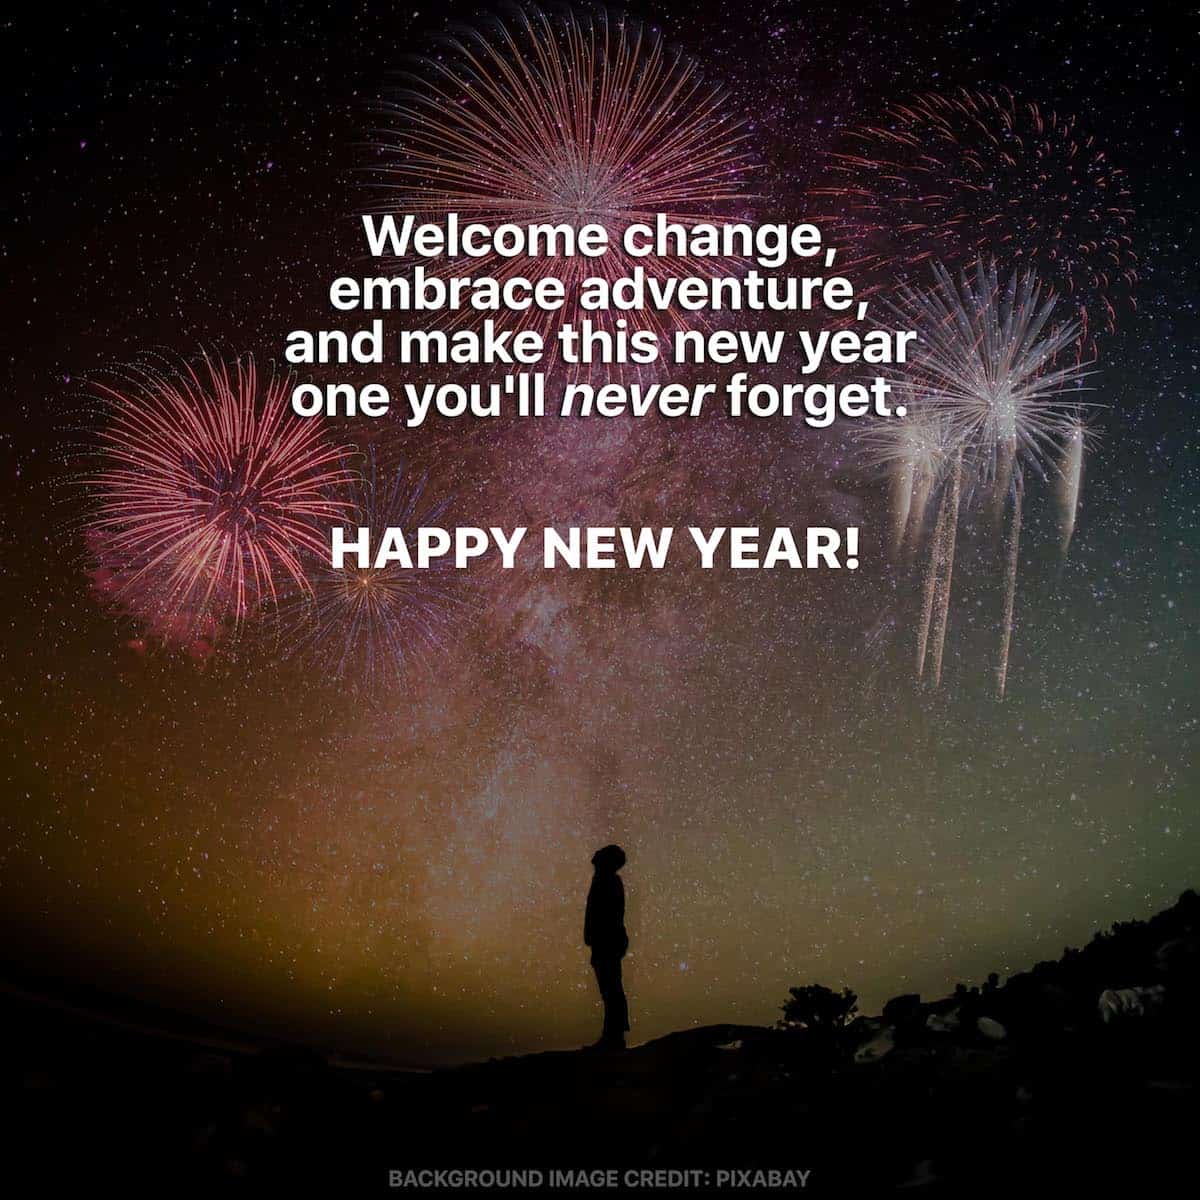 12 NEW YEAR QUOTES, WISHES & GREETINGS for Travelers The